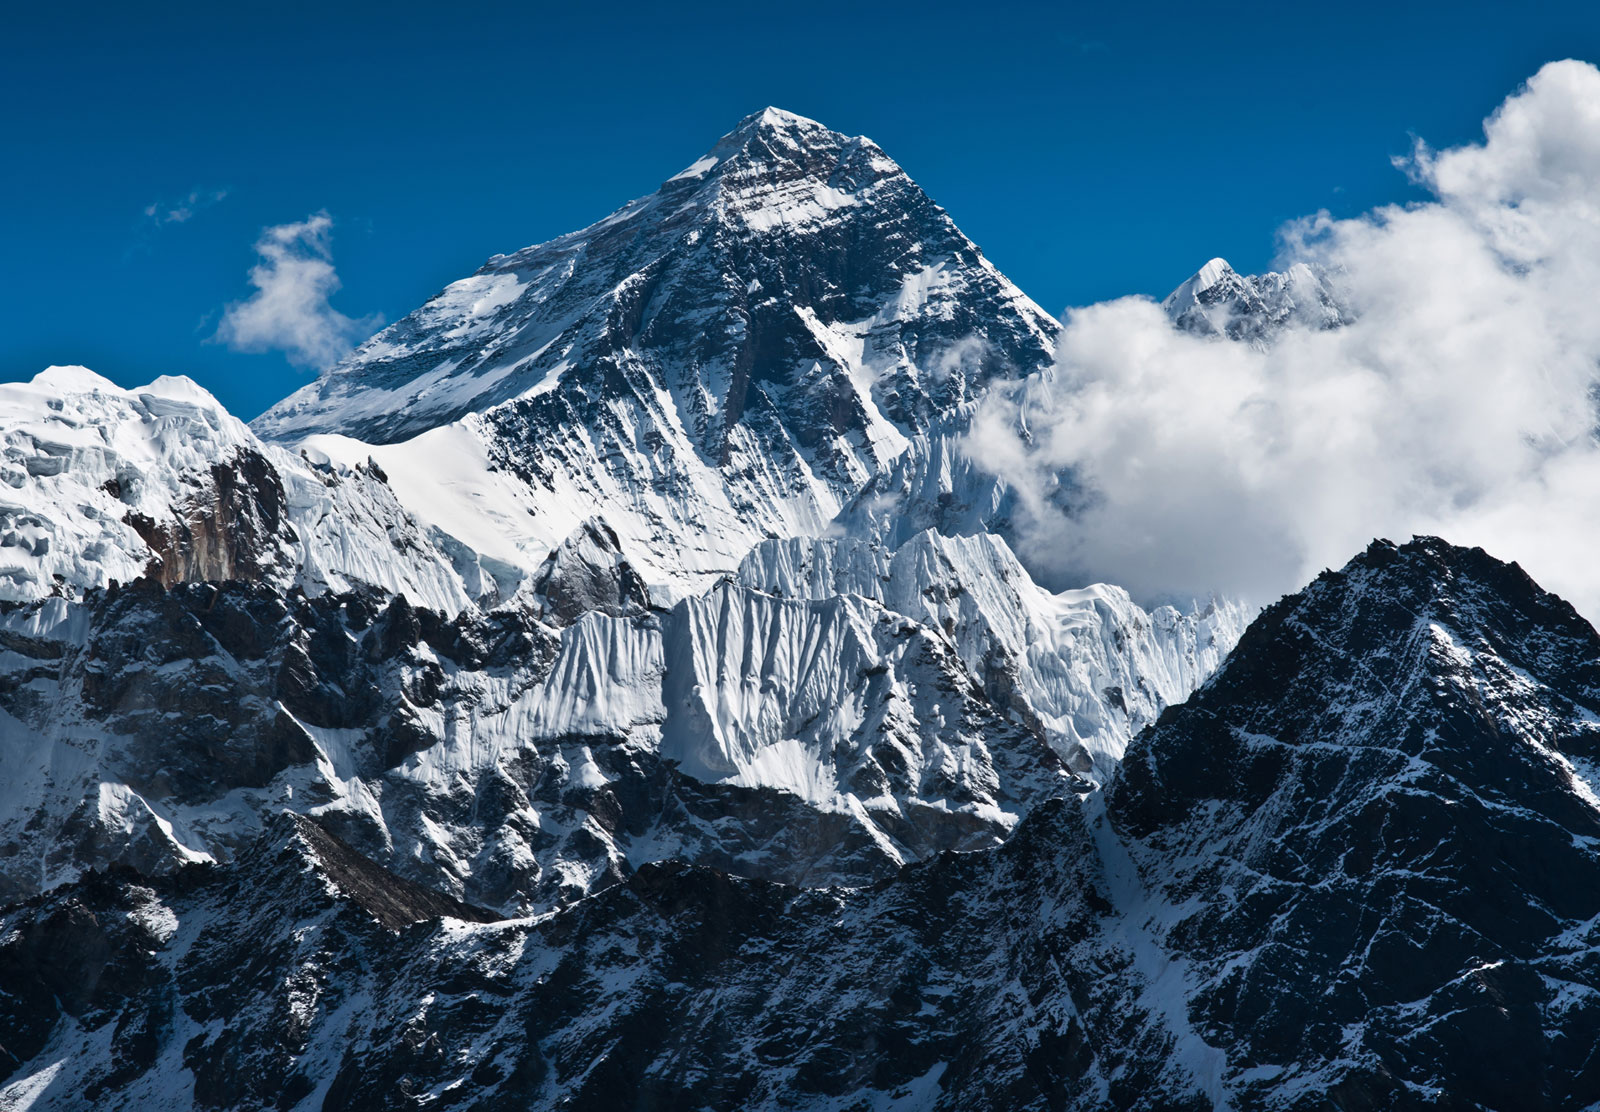 200 mountain climbers will have permission to ascend Everest this spring